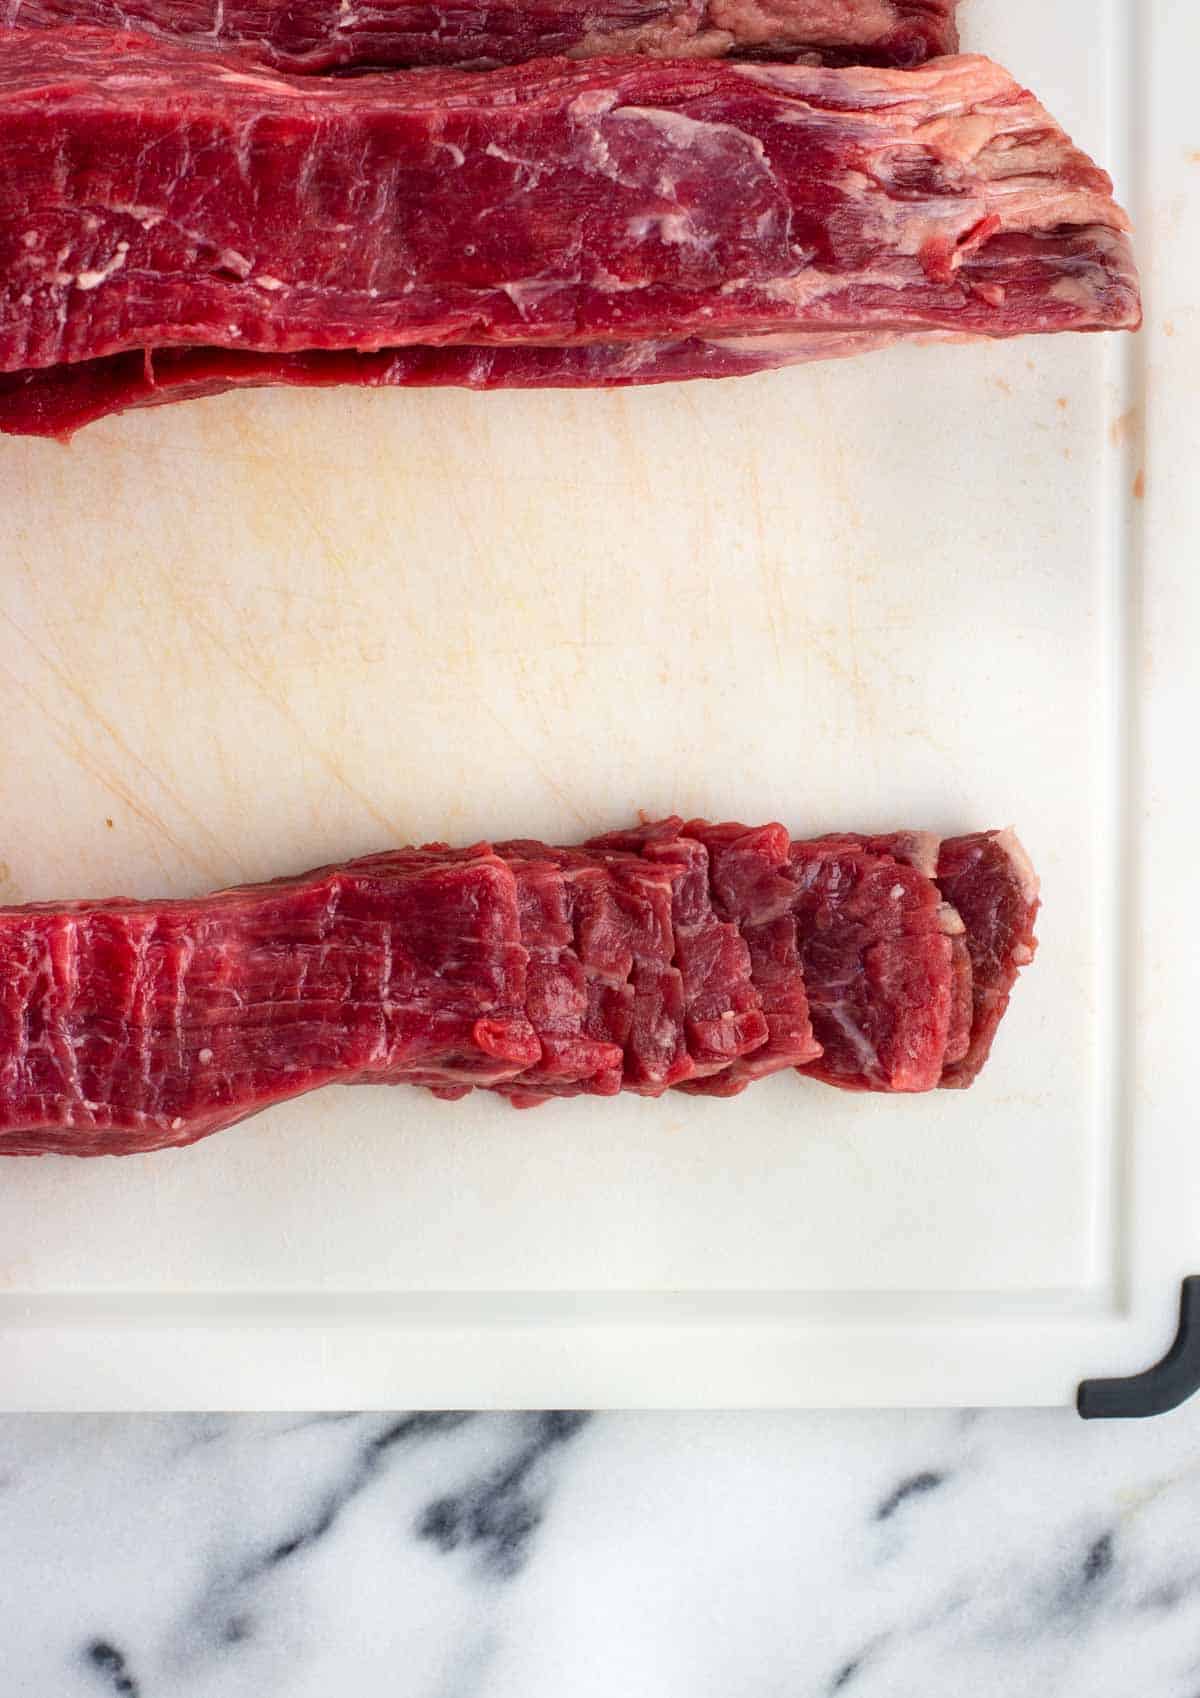 A strip of flank steak sliced into thin strips for stir fry.